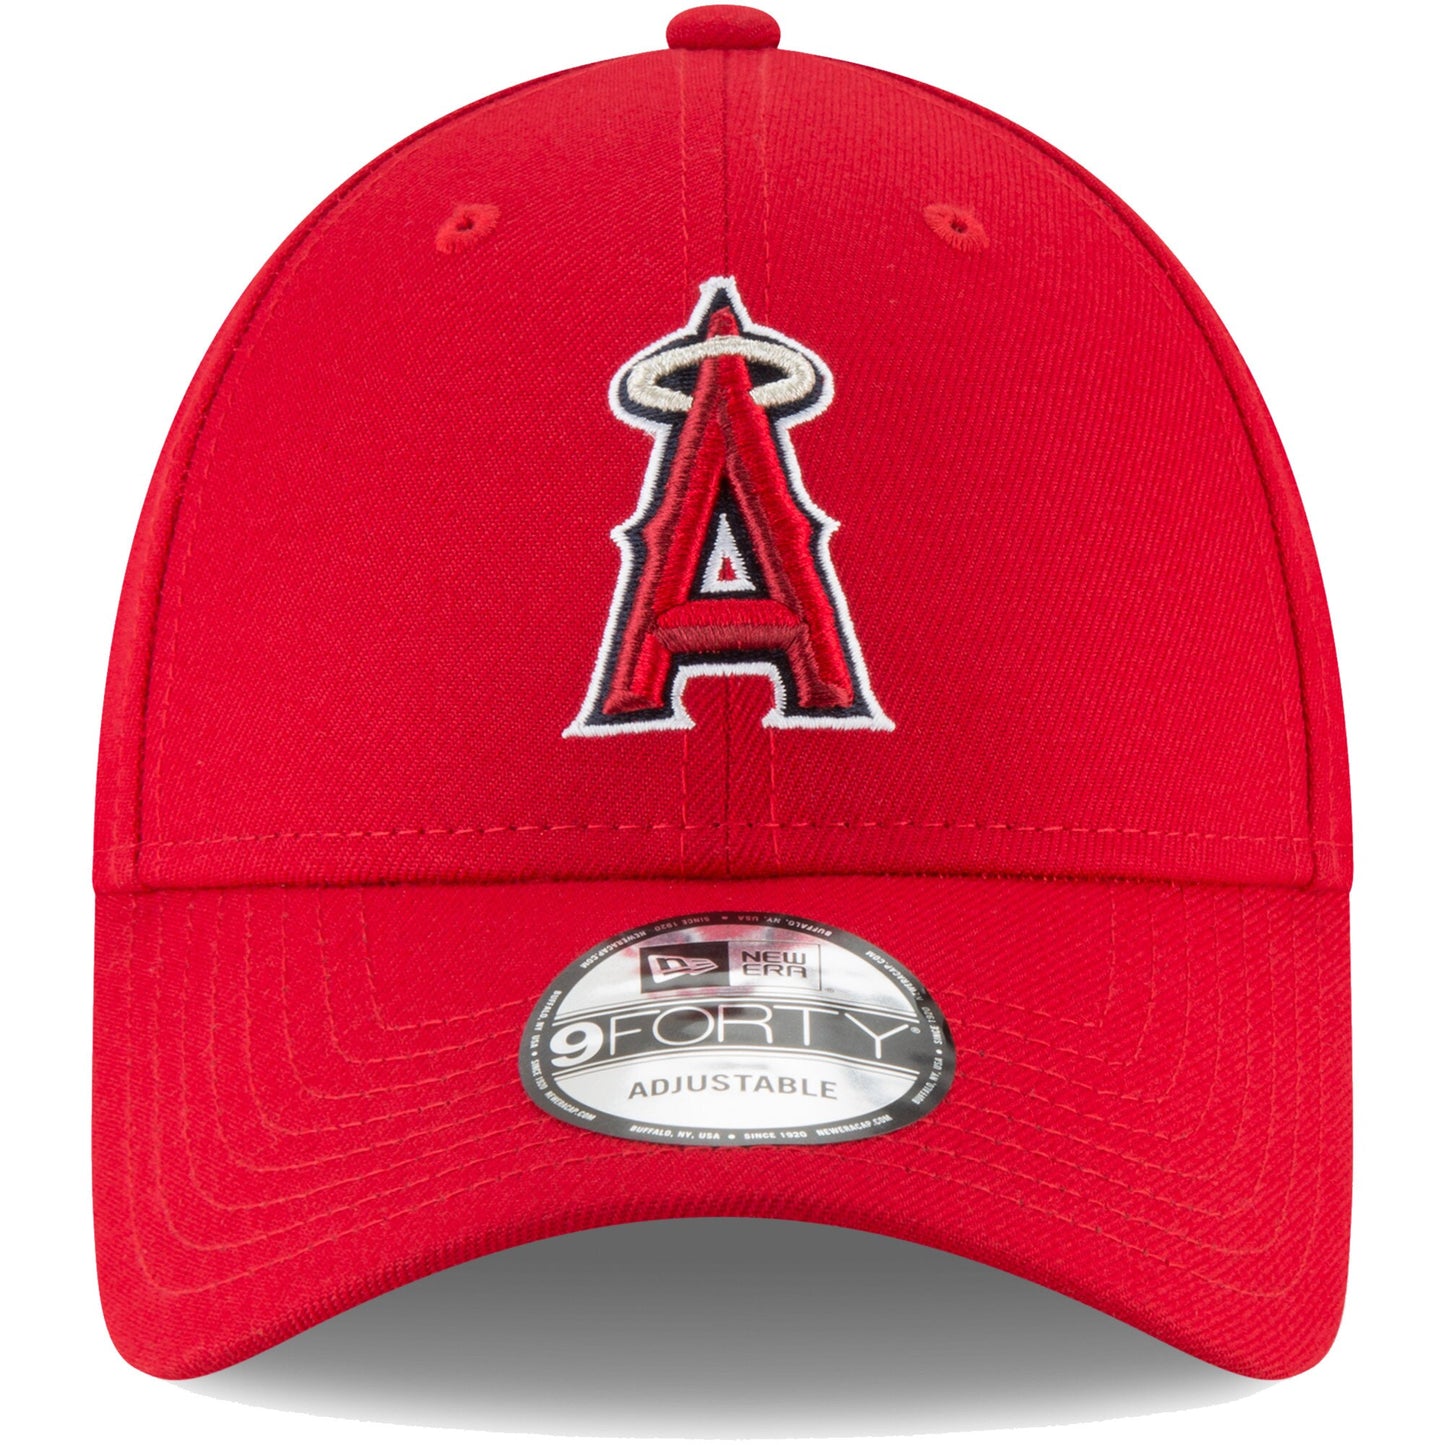 Men's Los Angeles Angels New Era Red Game The League 9FORTY Adjustable Hat